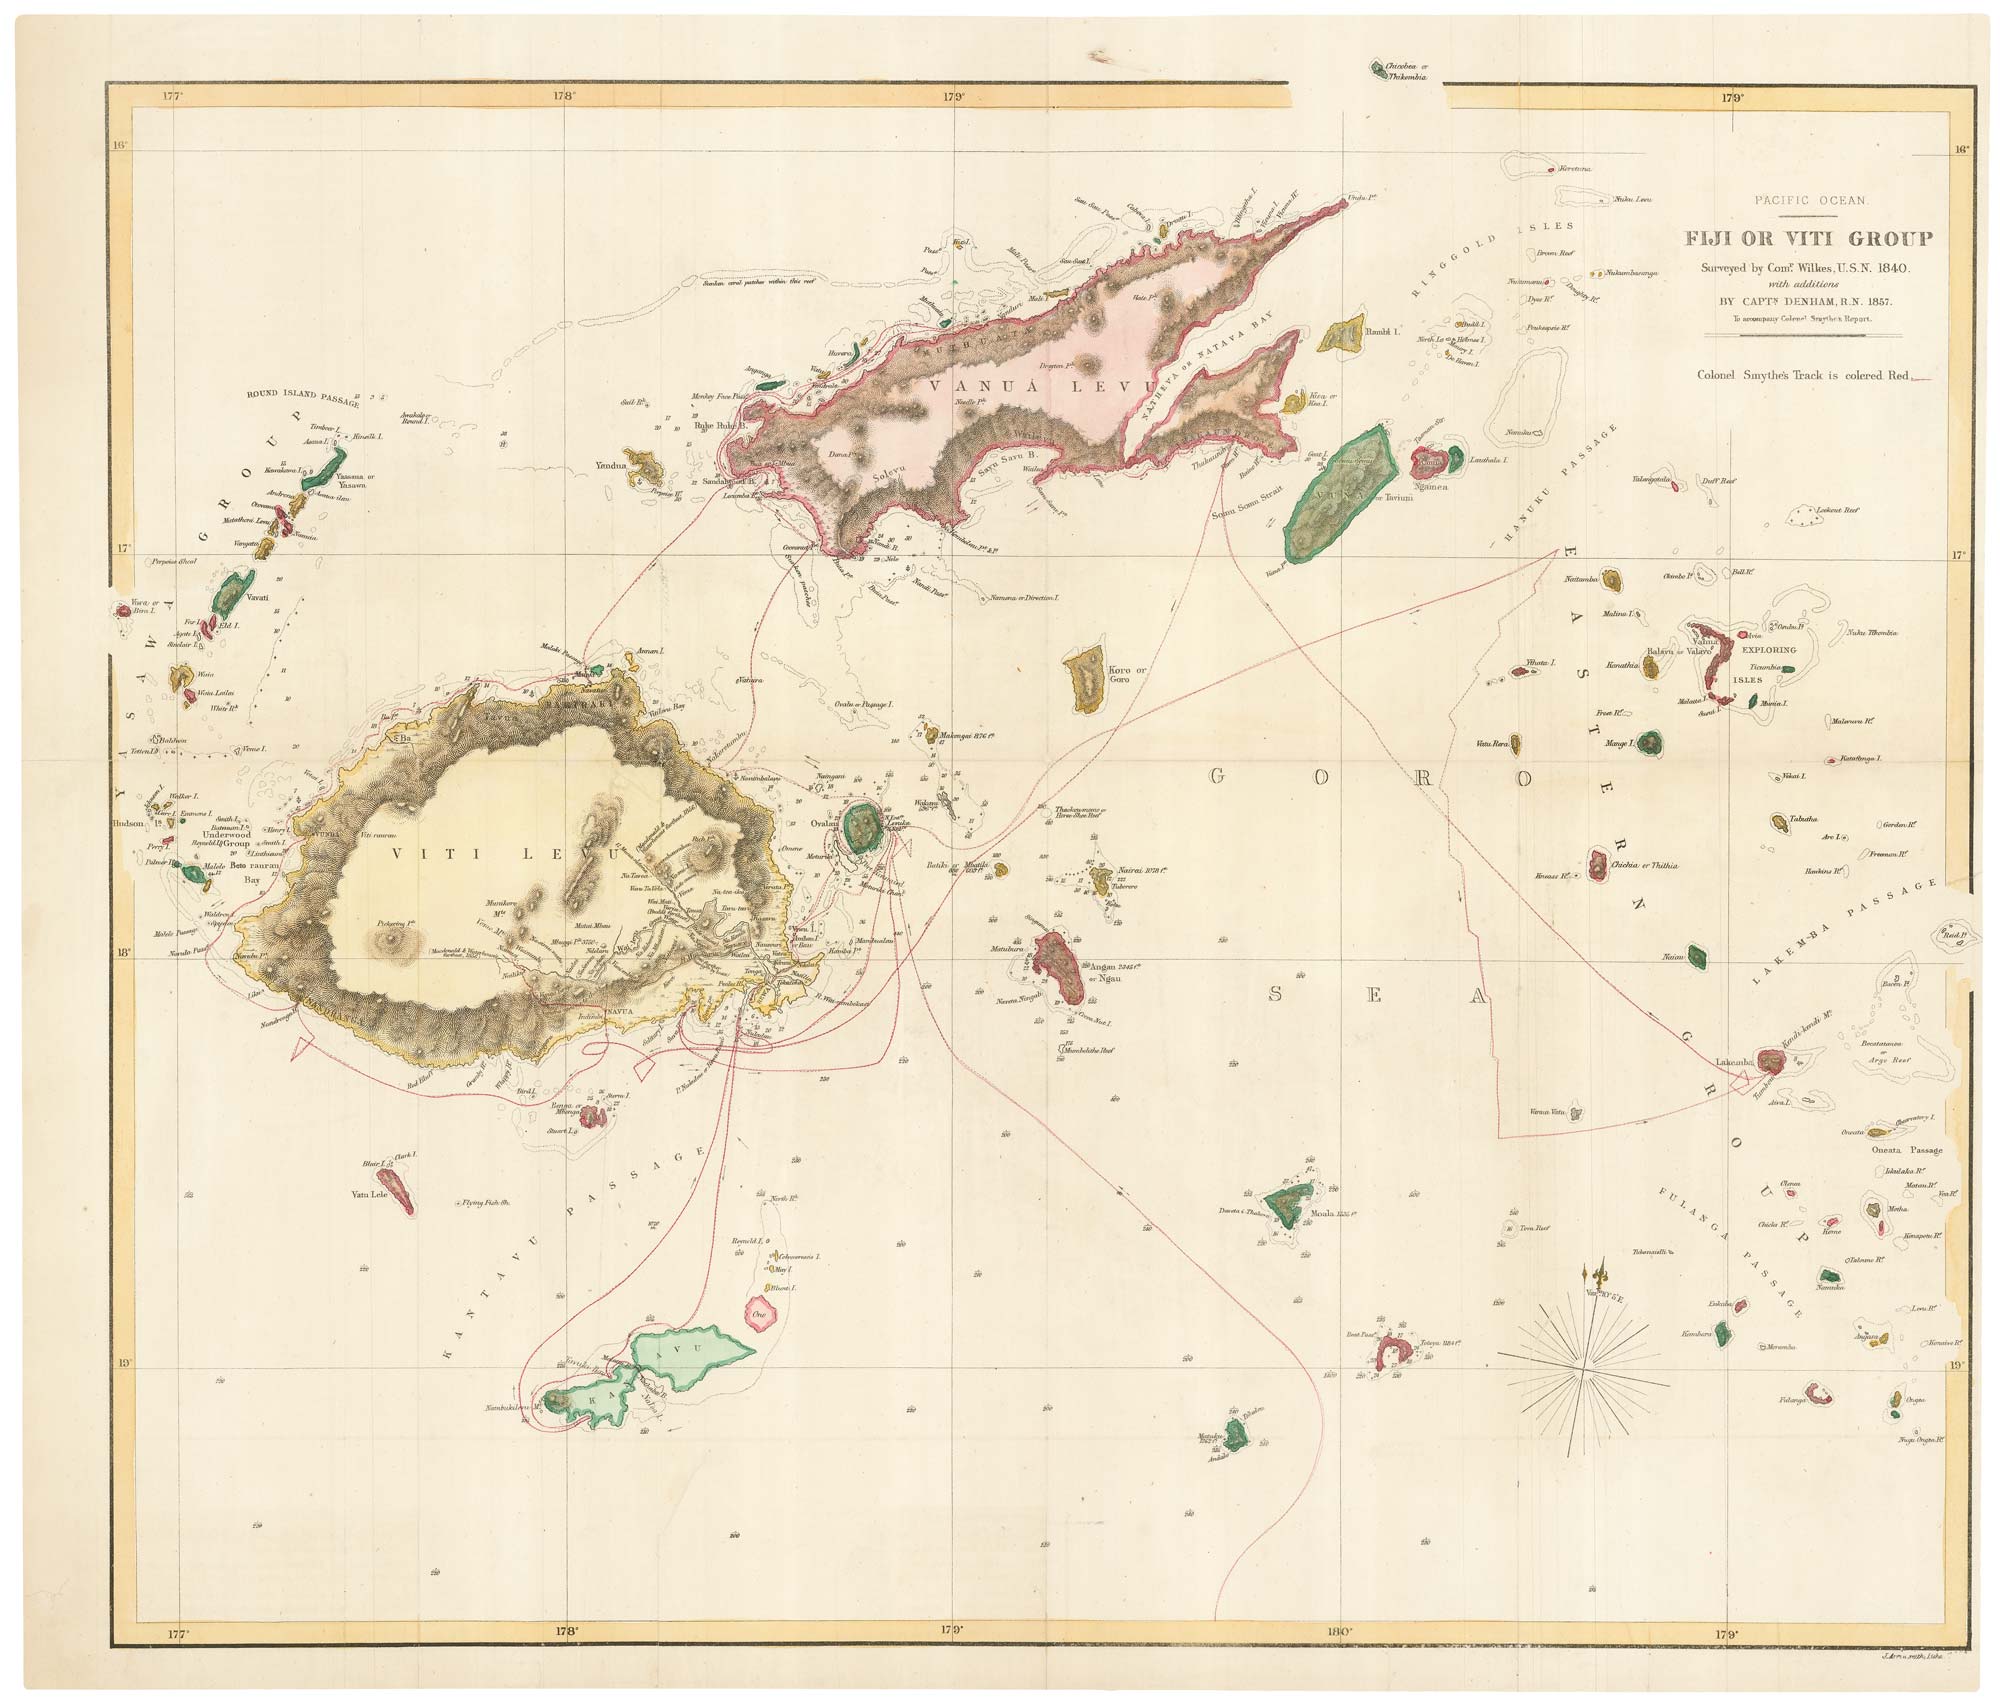 Fiji or Viti Group. Surveyed by Com.r Wilkes U.S.N. 1840. with additions by Capt.n Denham, R.N., 1857. To accompany Colonel Smythe's Report.